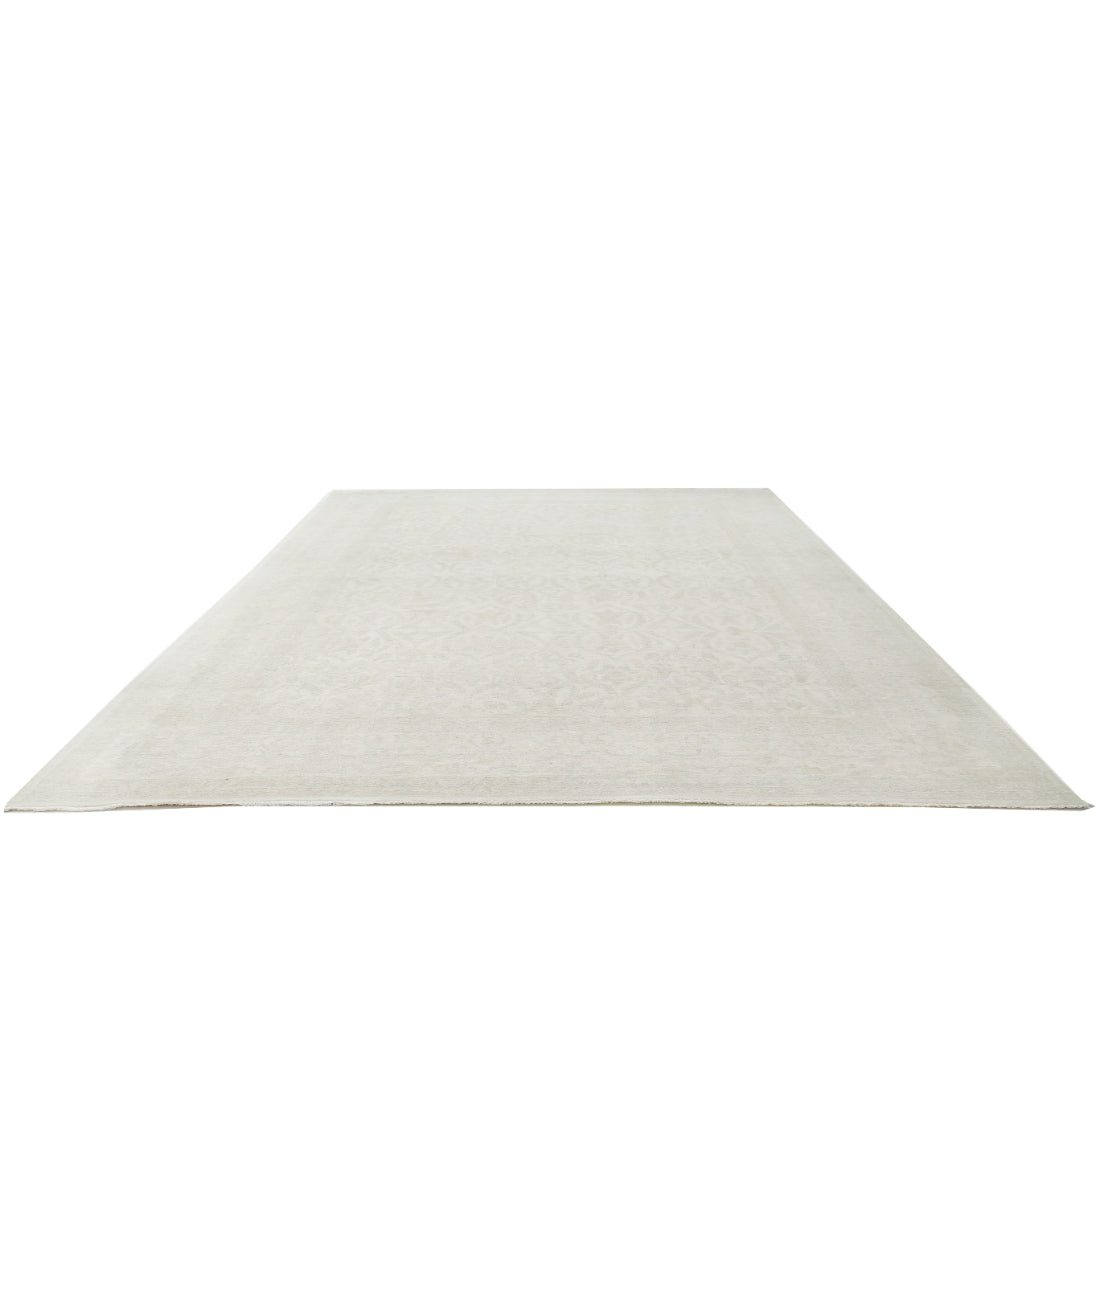 Serenity 11' 10" X 16' 9" Hand-Knotted Wool Rug 11' 10" X 16' 9" (361 X 511) / Ivory / Blue